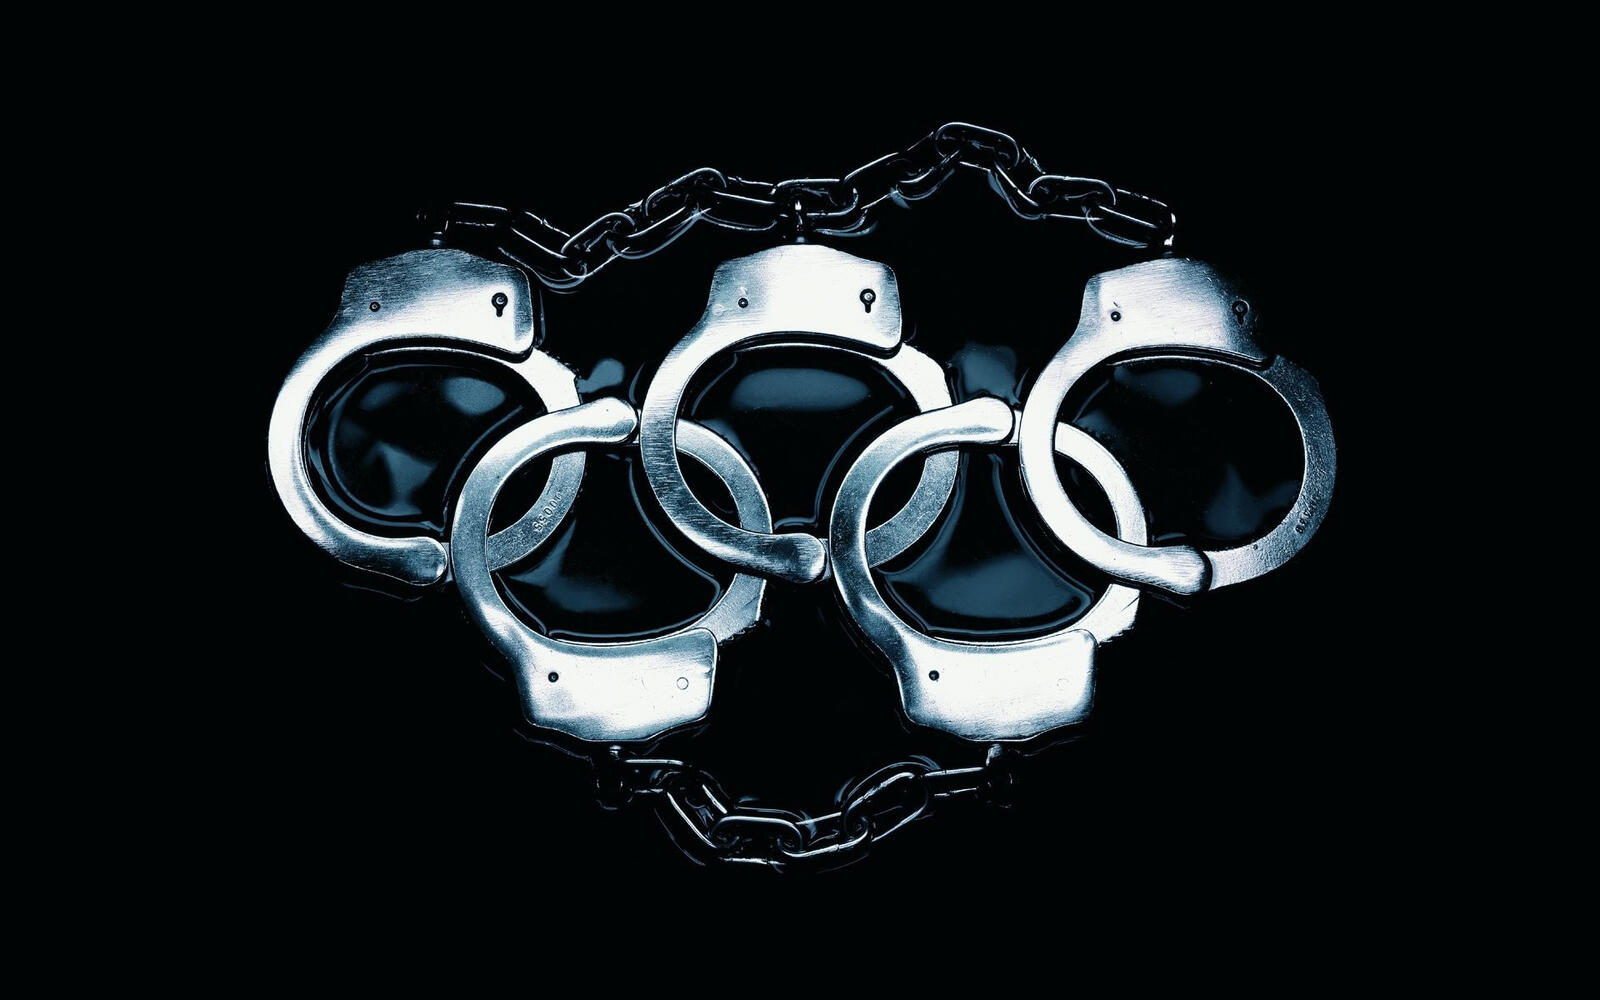 Wallpapers olympics rings handcuffs on the desktop